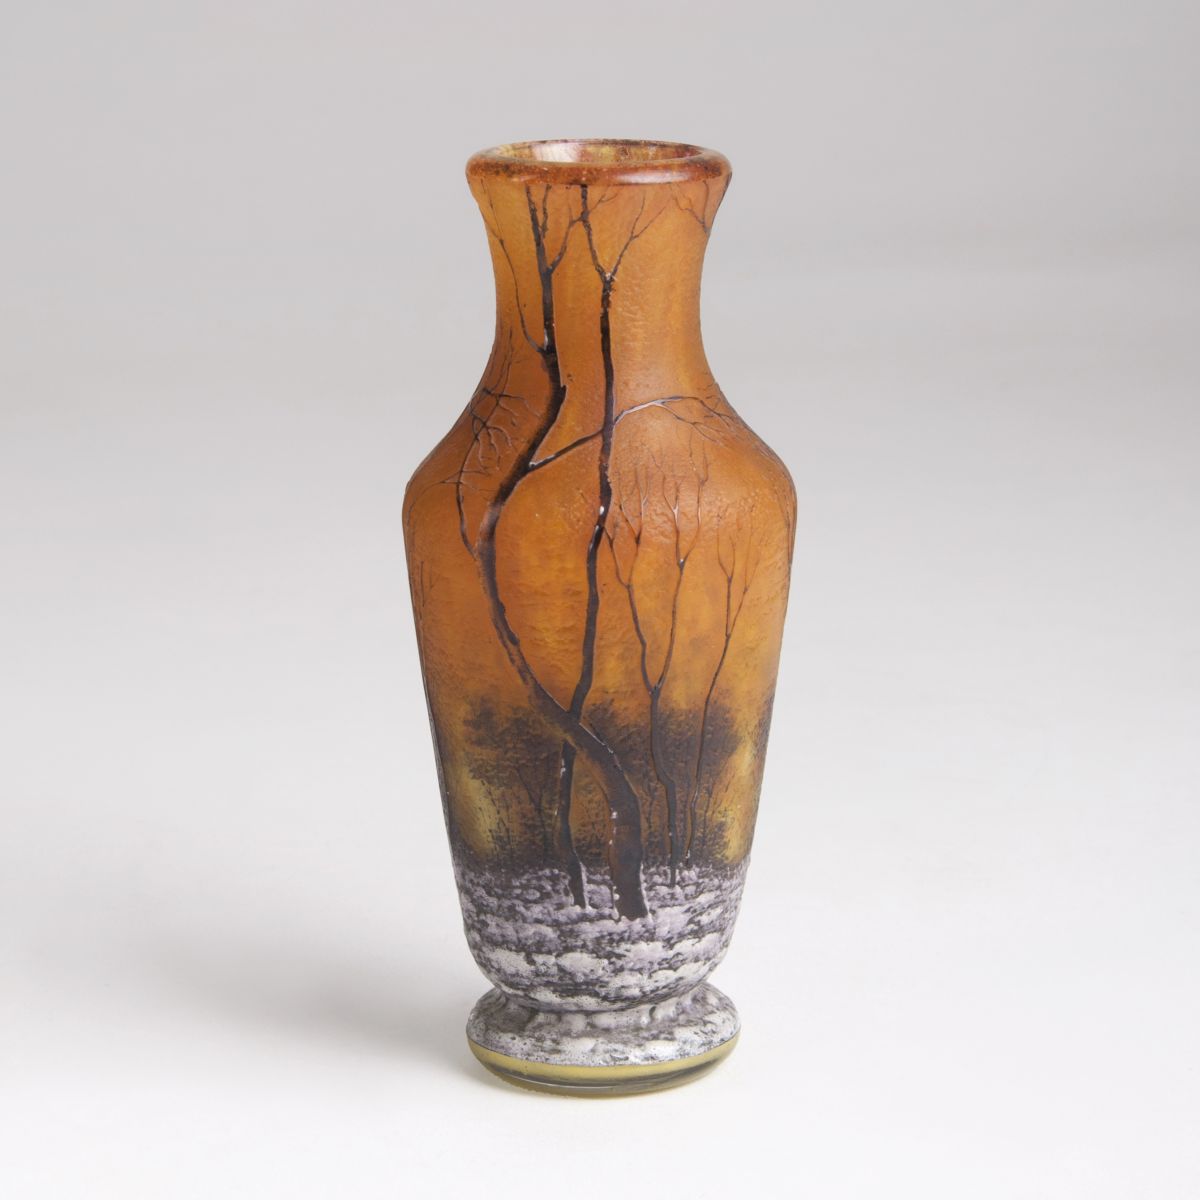 A small baluster-shaped vase with winter landscape